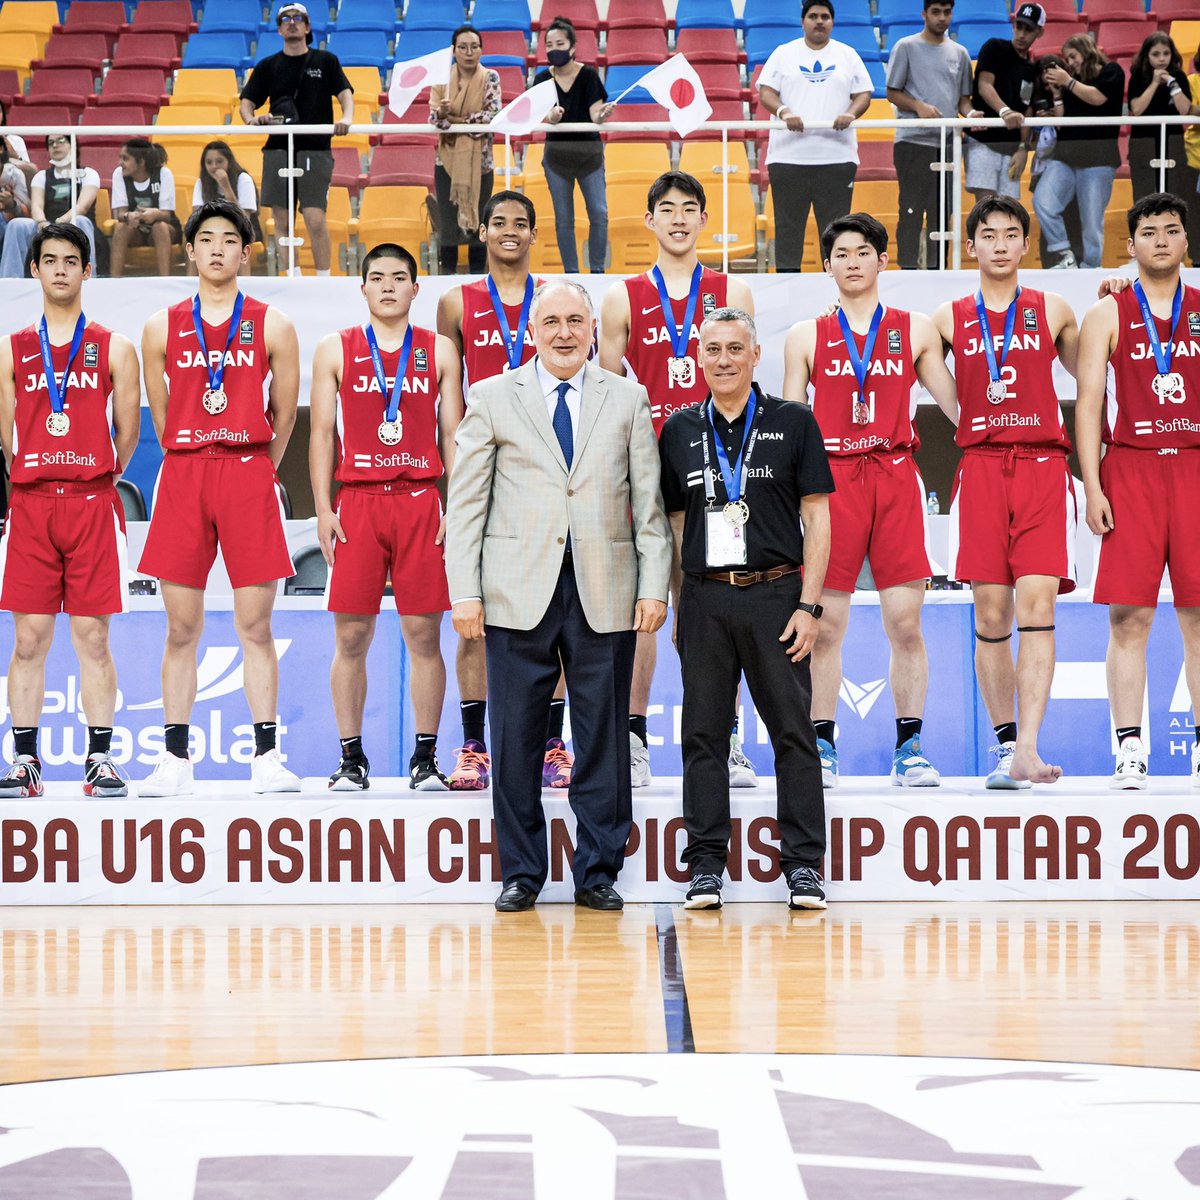 A golden silver for Japan 🇯🇵, who tally their best finish ever in the #FIBAU16Asia! See you in Spain in two weeks for the FIBA U17 World Cup! 🙌 | @JAPANBASKETBALL x @JAPAN_JBA